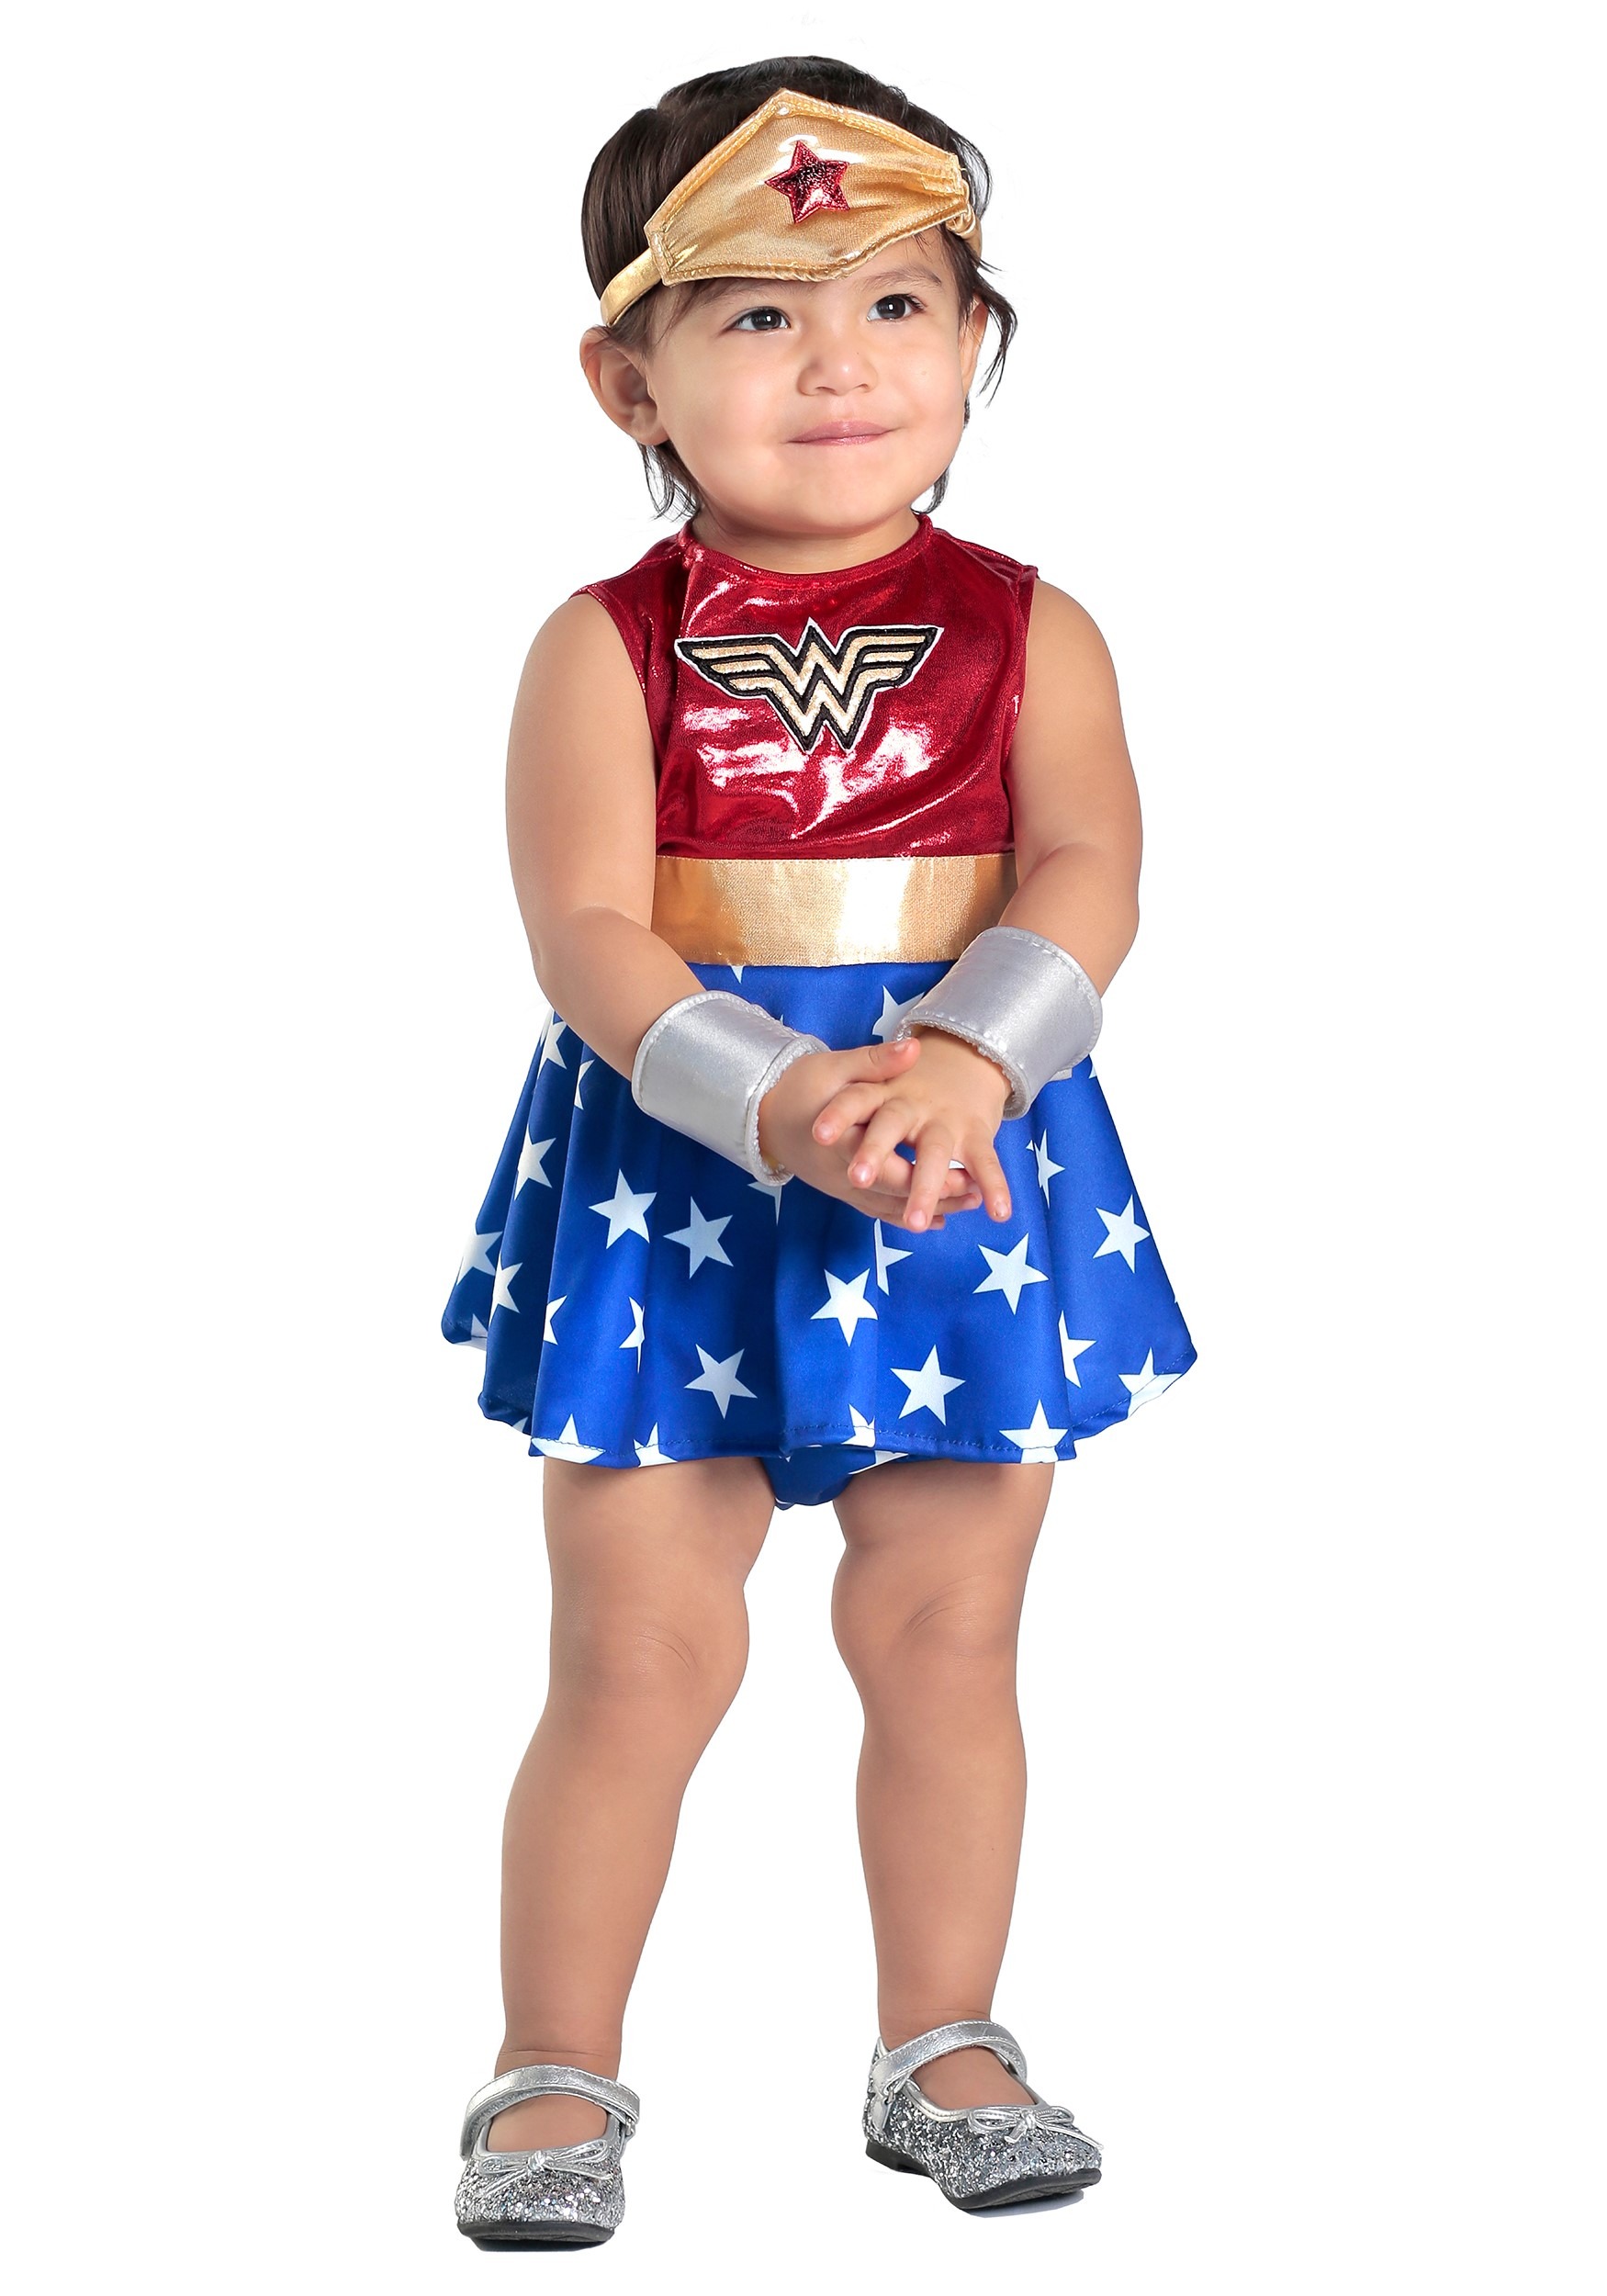 Photos - Fancy Dress Princess Paradise Wonder Woman Costume For Toddlers Blue/Brown/Red 